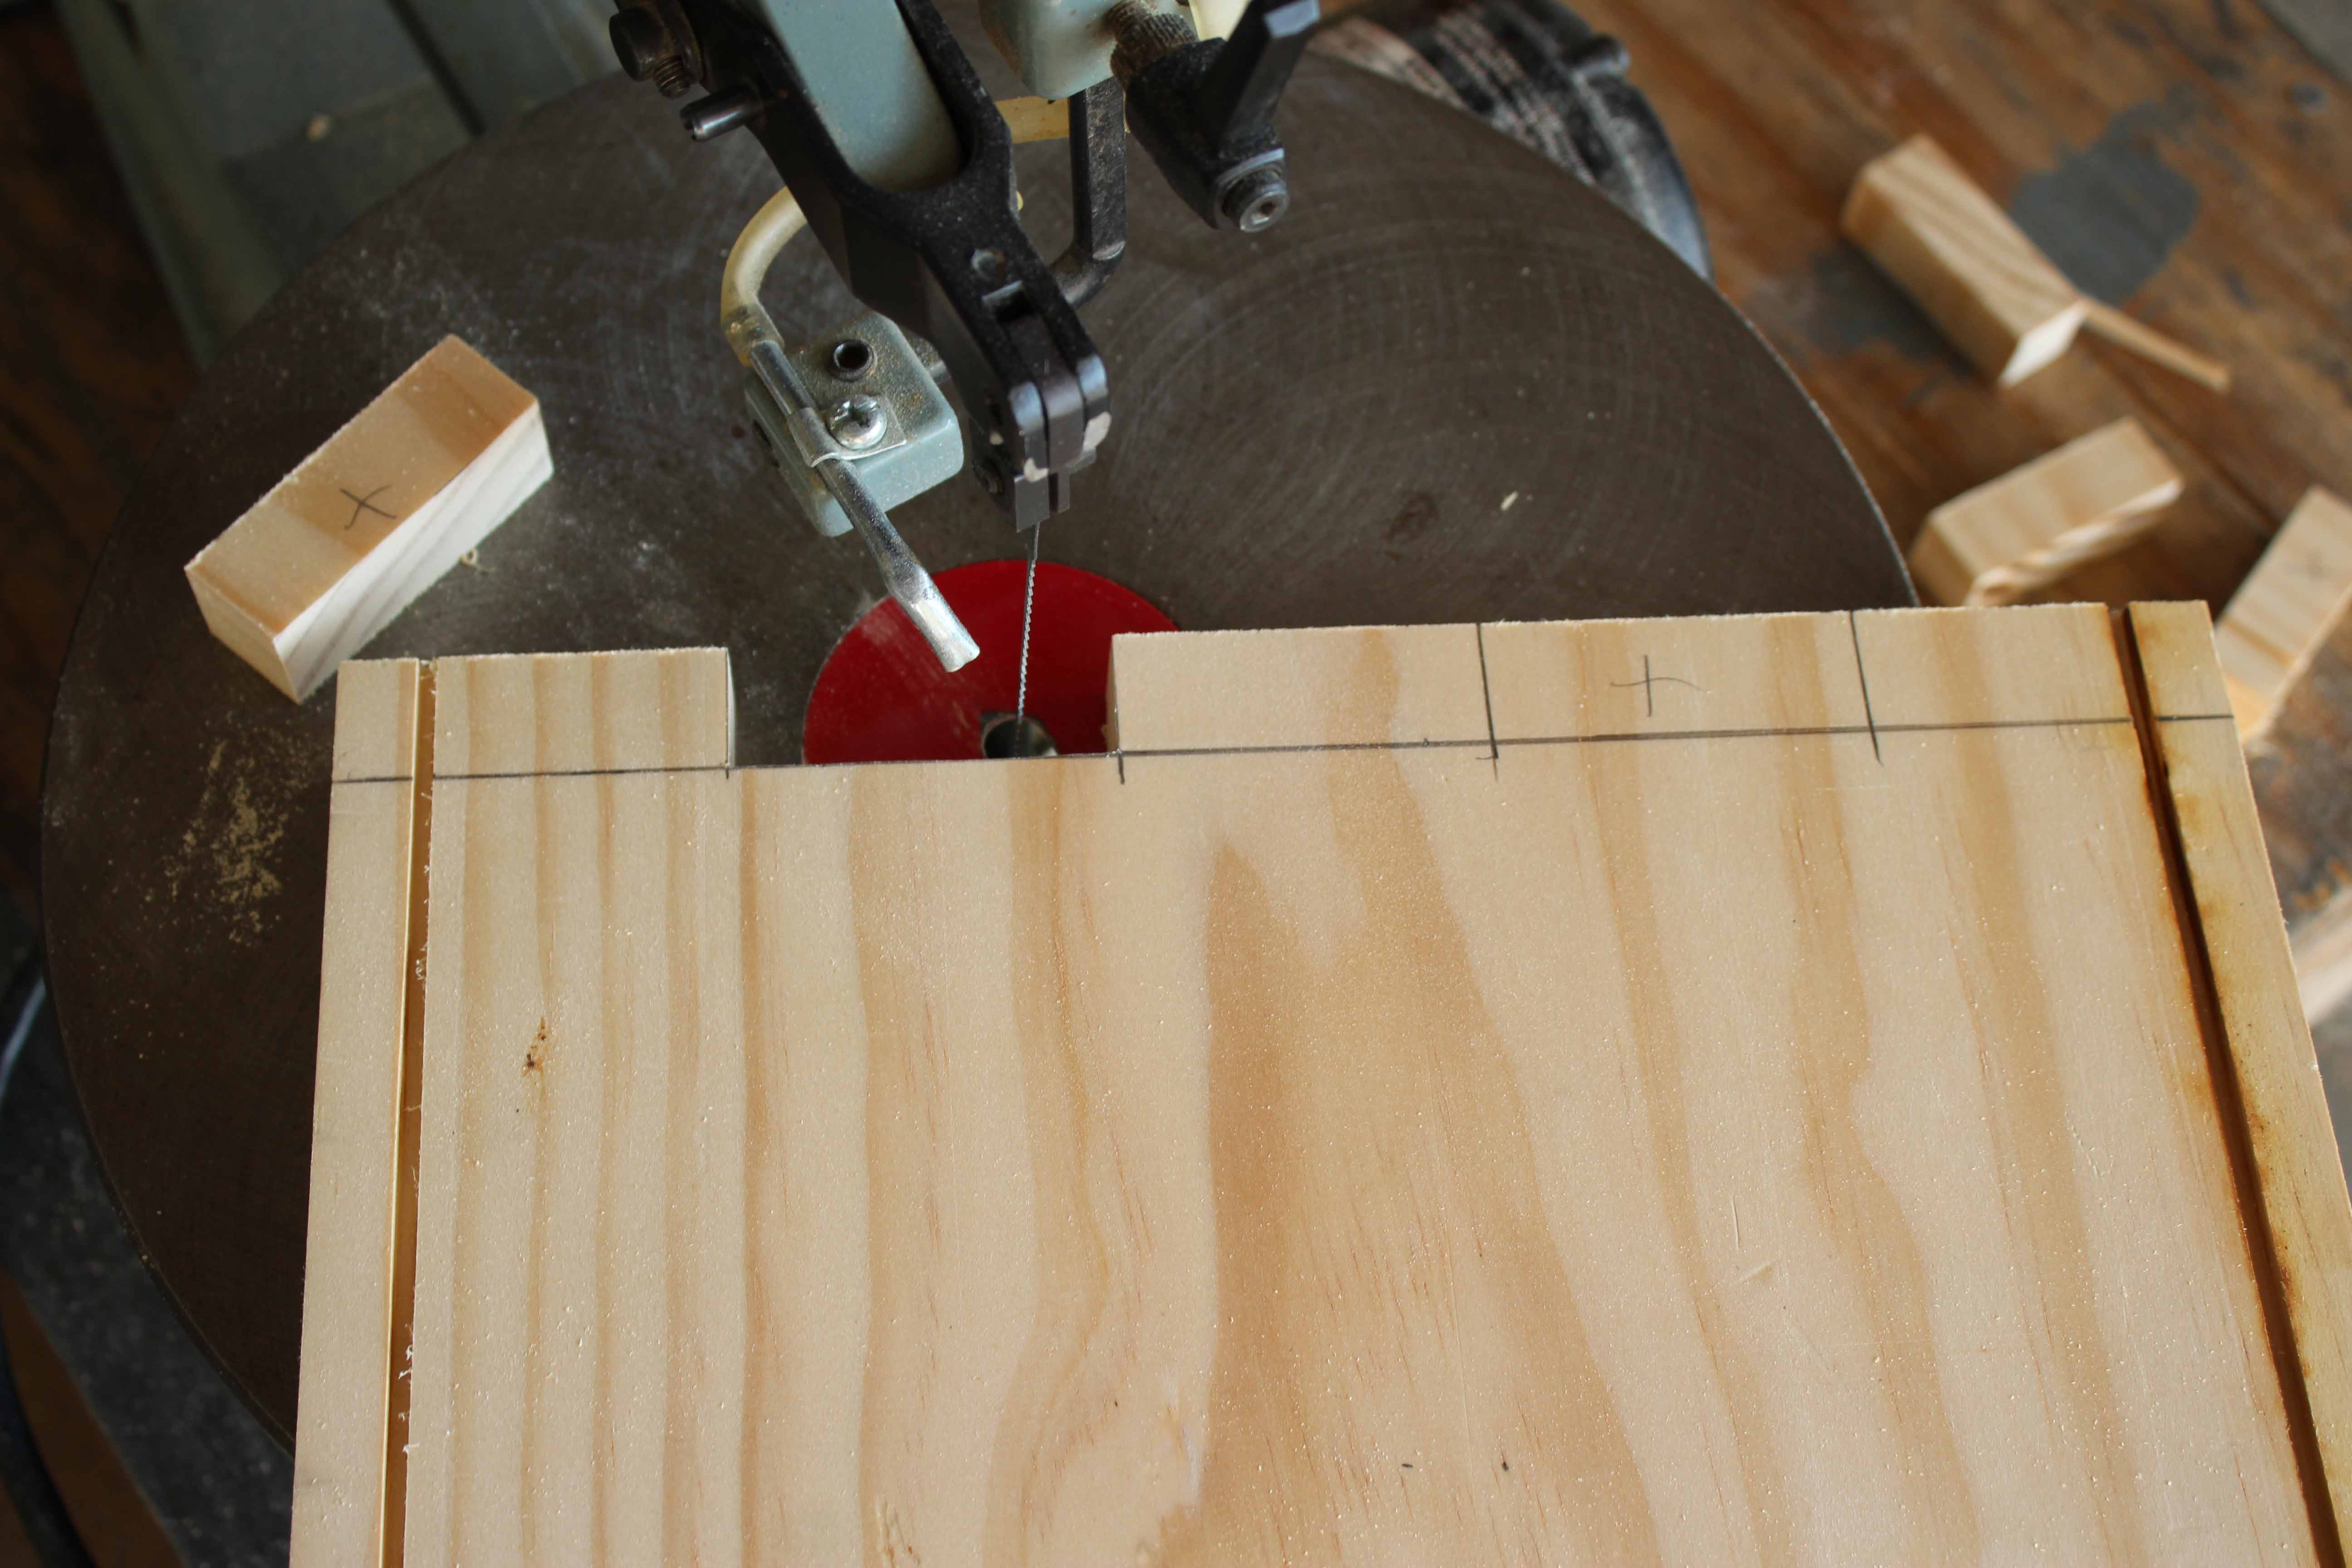 Using a scroll saw to create box joints in manufacturing an ATX power supply